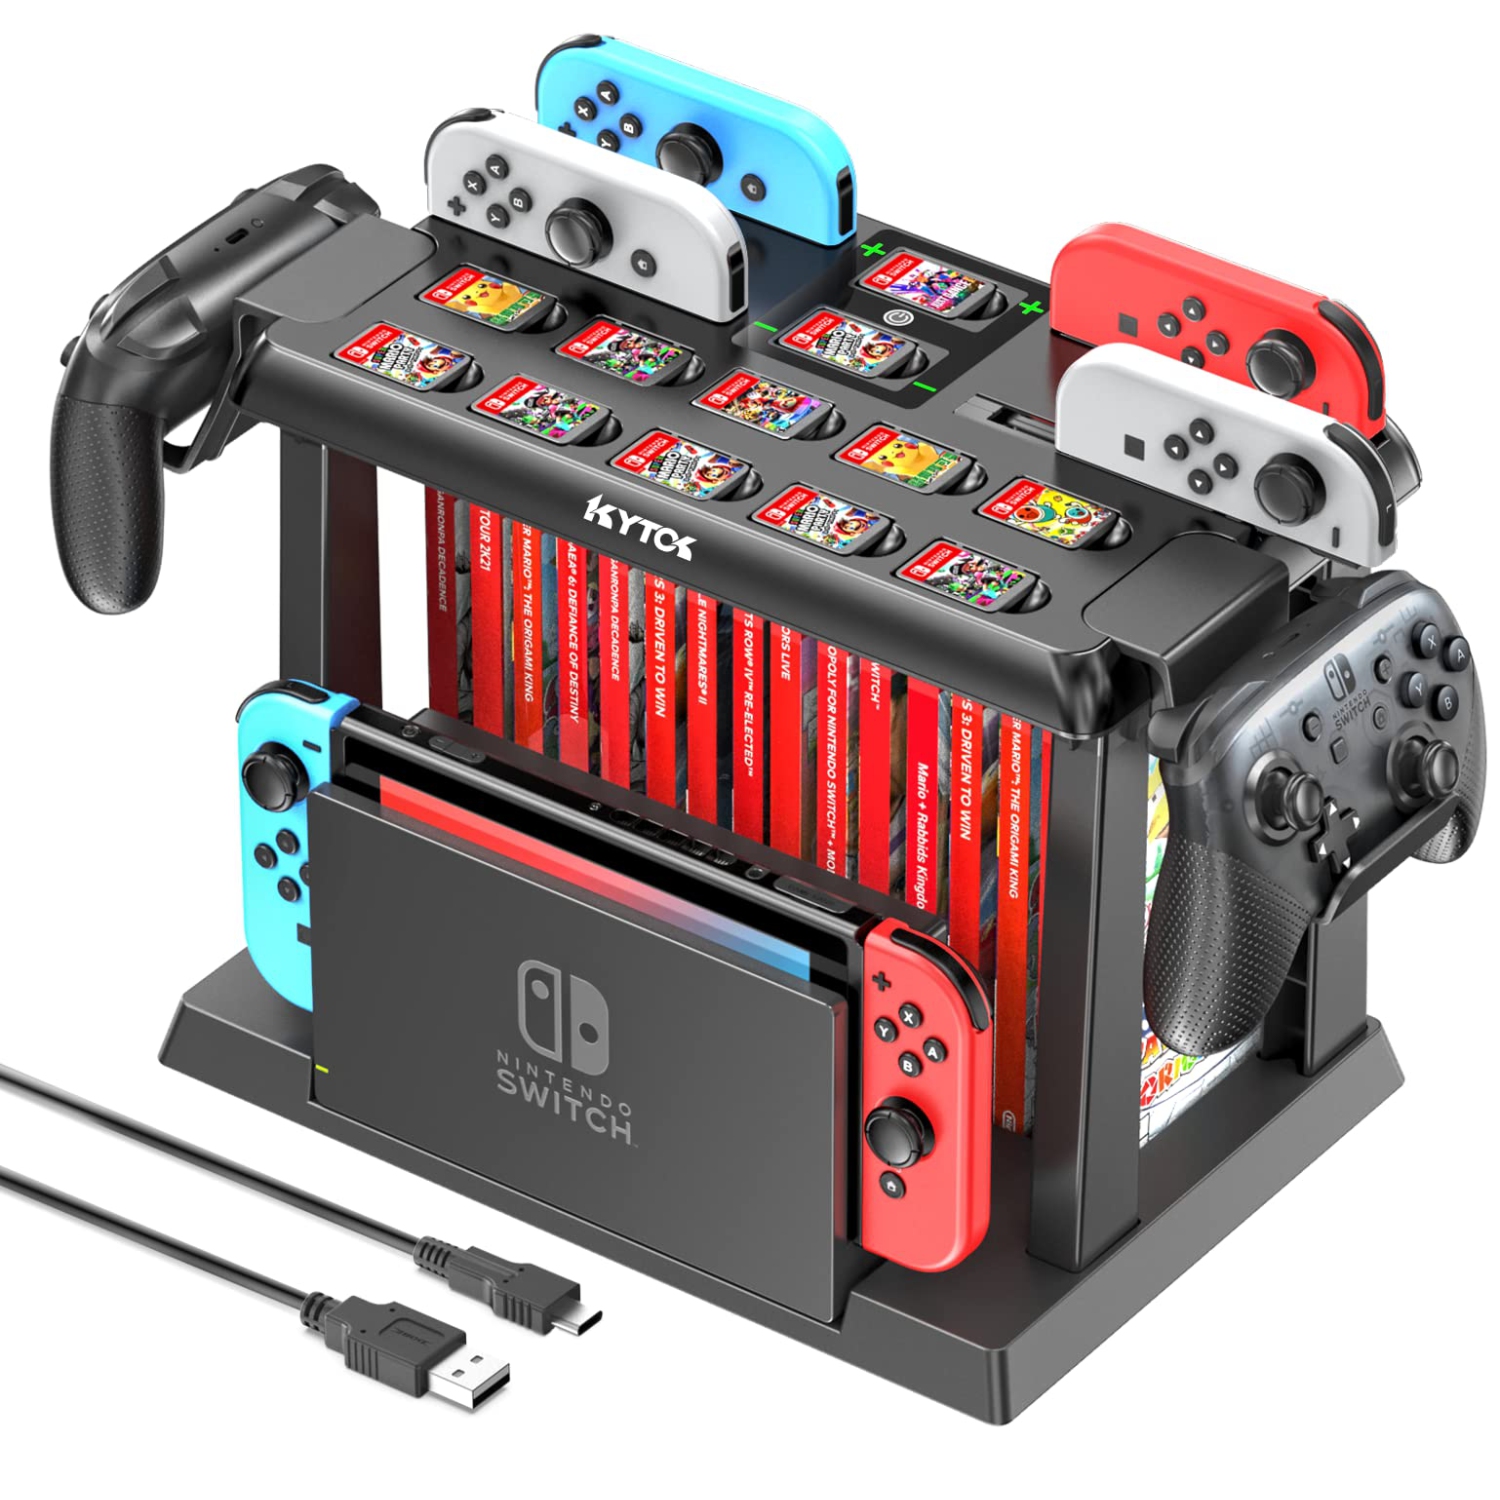 Switch Games Organizer Station with Controller Charger, Charging Dock for Nintendo Switch & OLED Joycons, Kytok Switch Storage and Organizer for Games, TV Dock, Pro Controller,